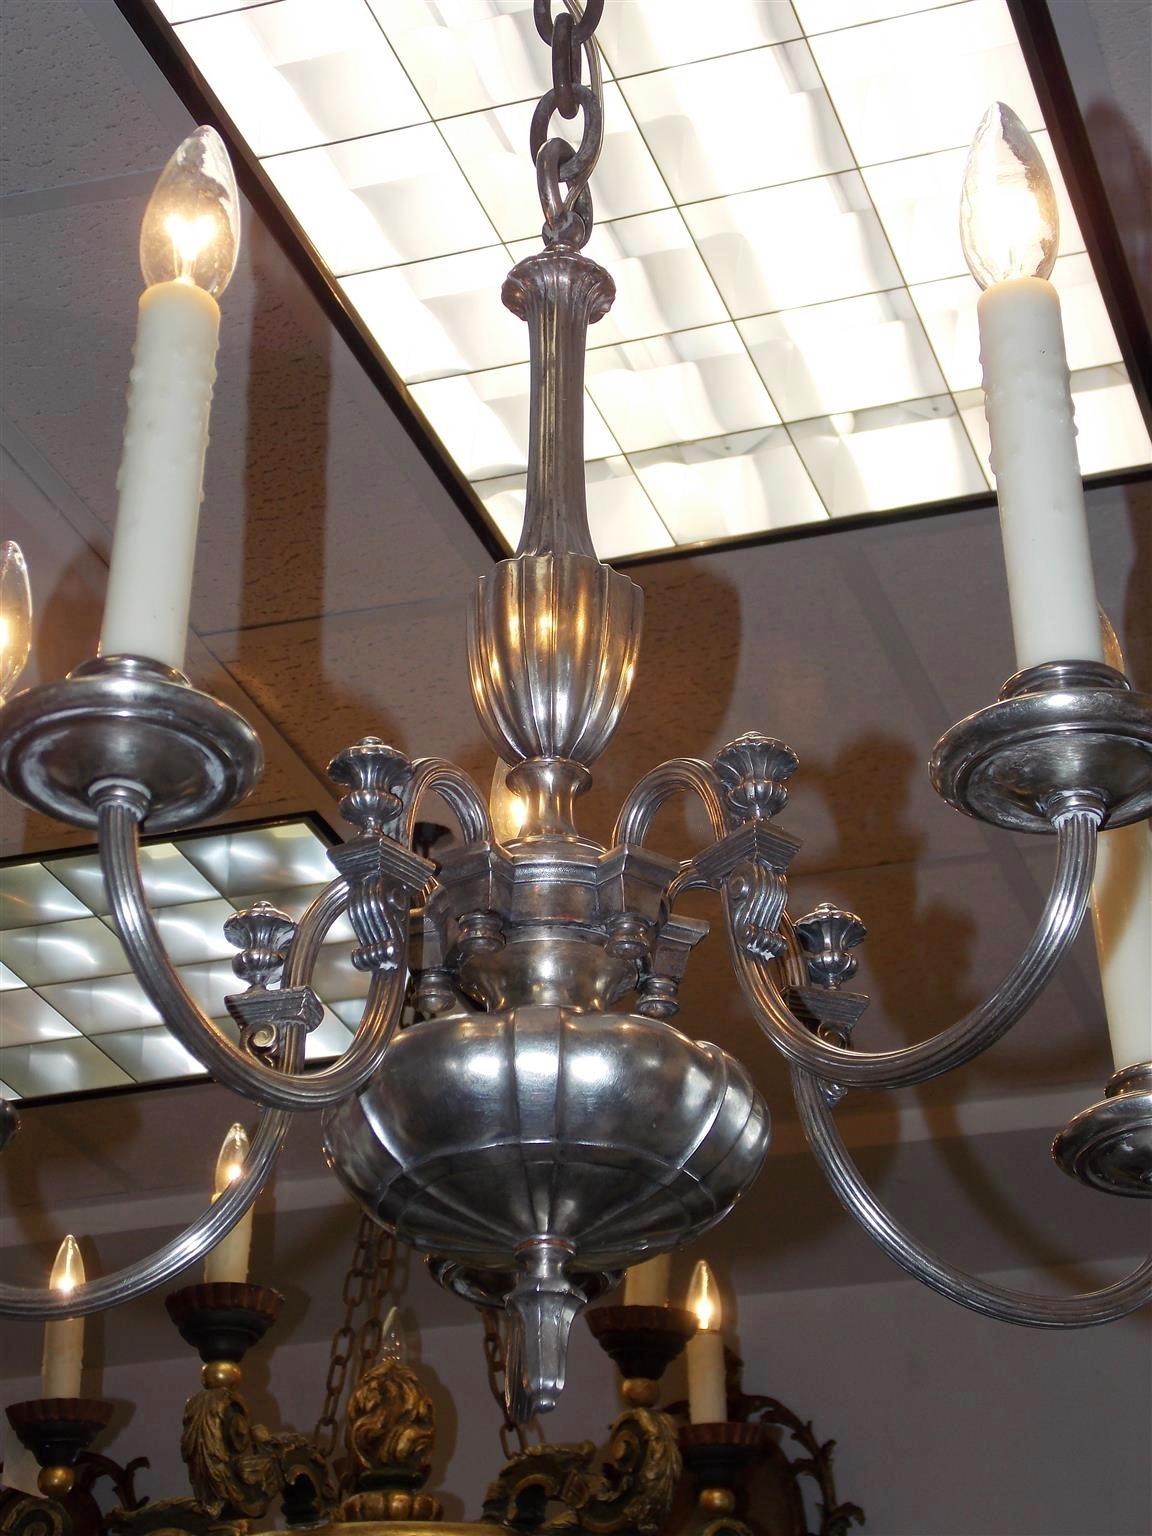 Cast American Nickel Silver Fluted Urn and Corbel Five Light Chandelier, Circa 1870